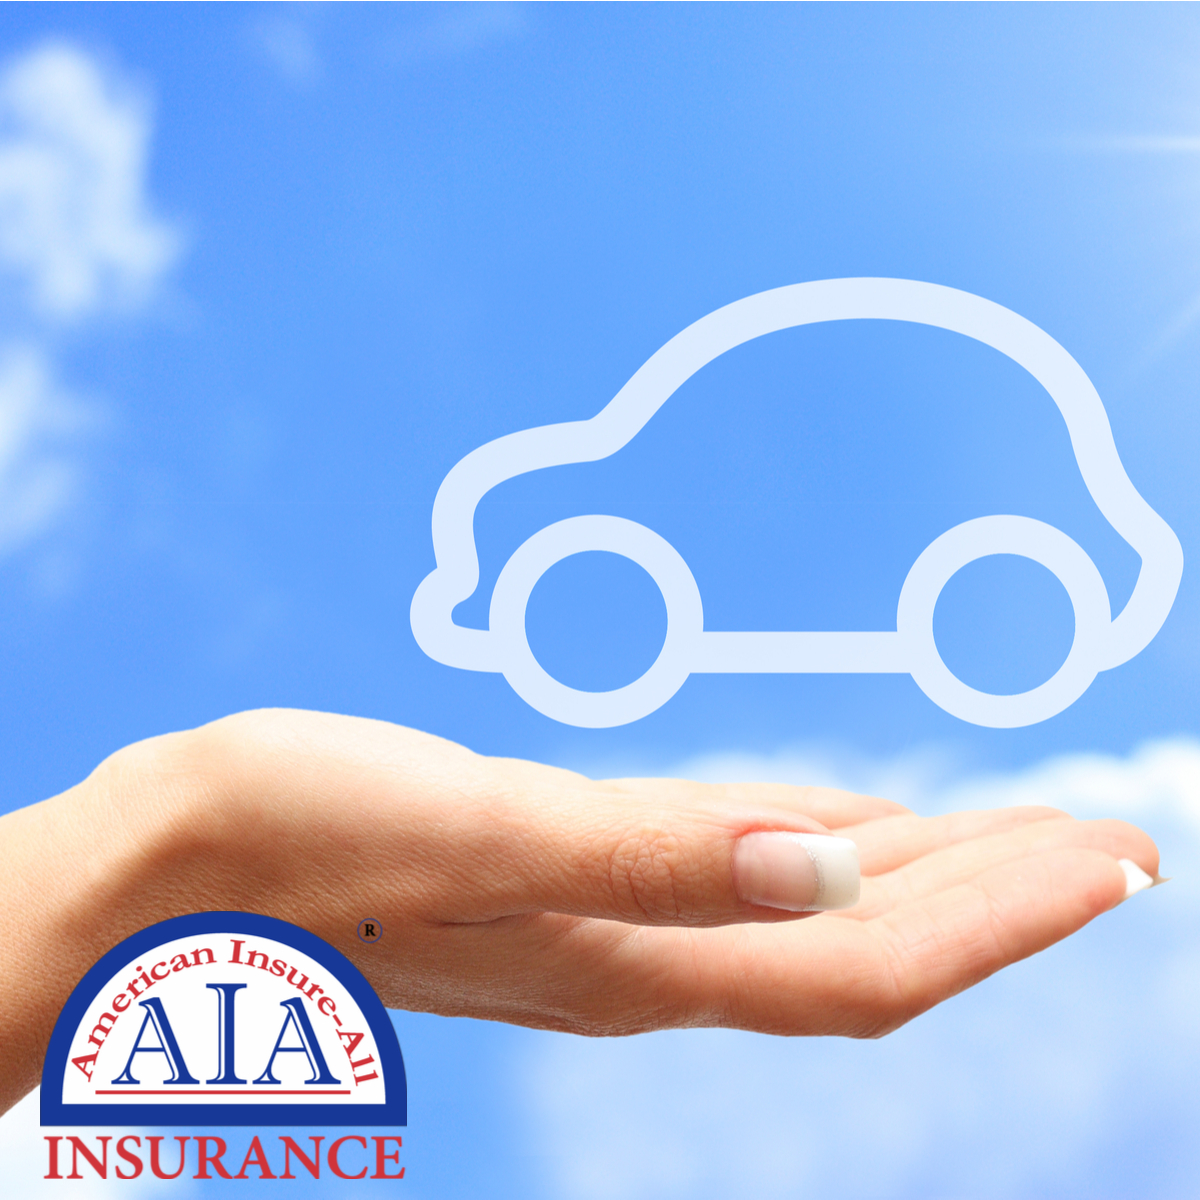 Does Your Credit Score Impact Auto Insurance Quotes from American Insure-All®?